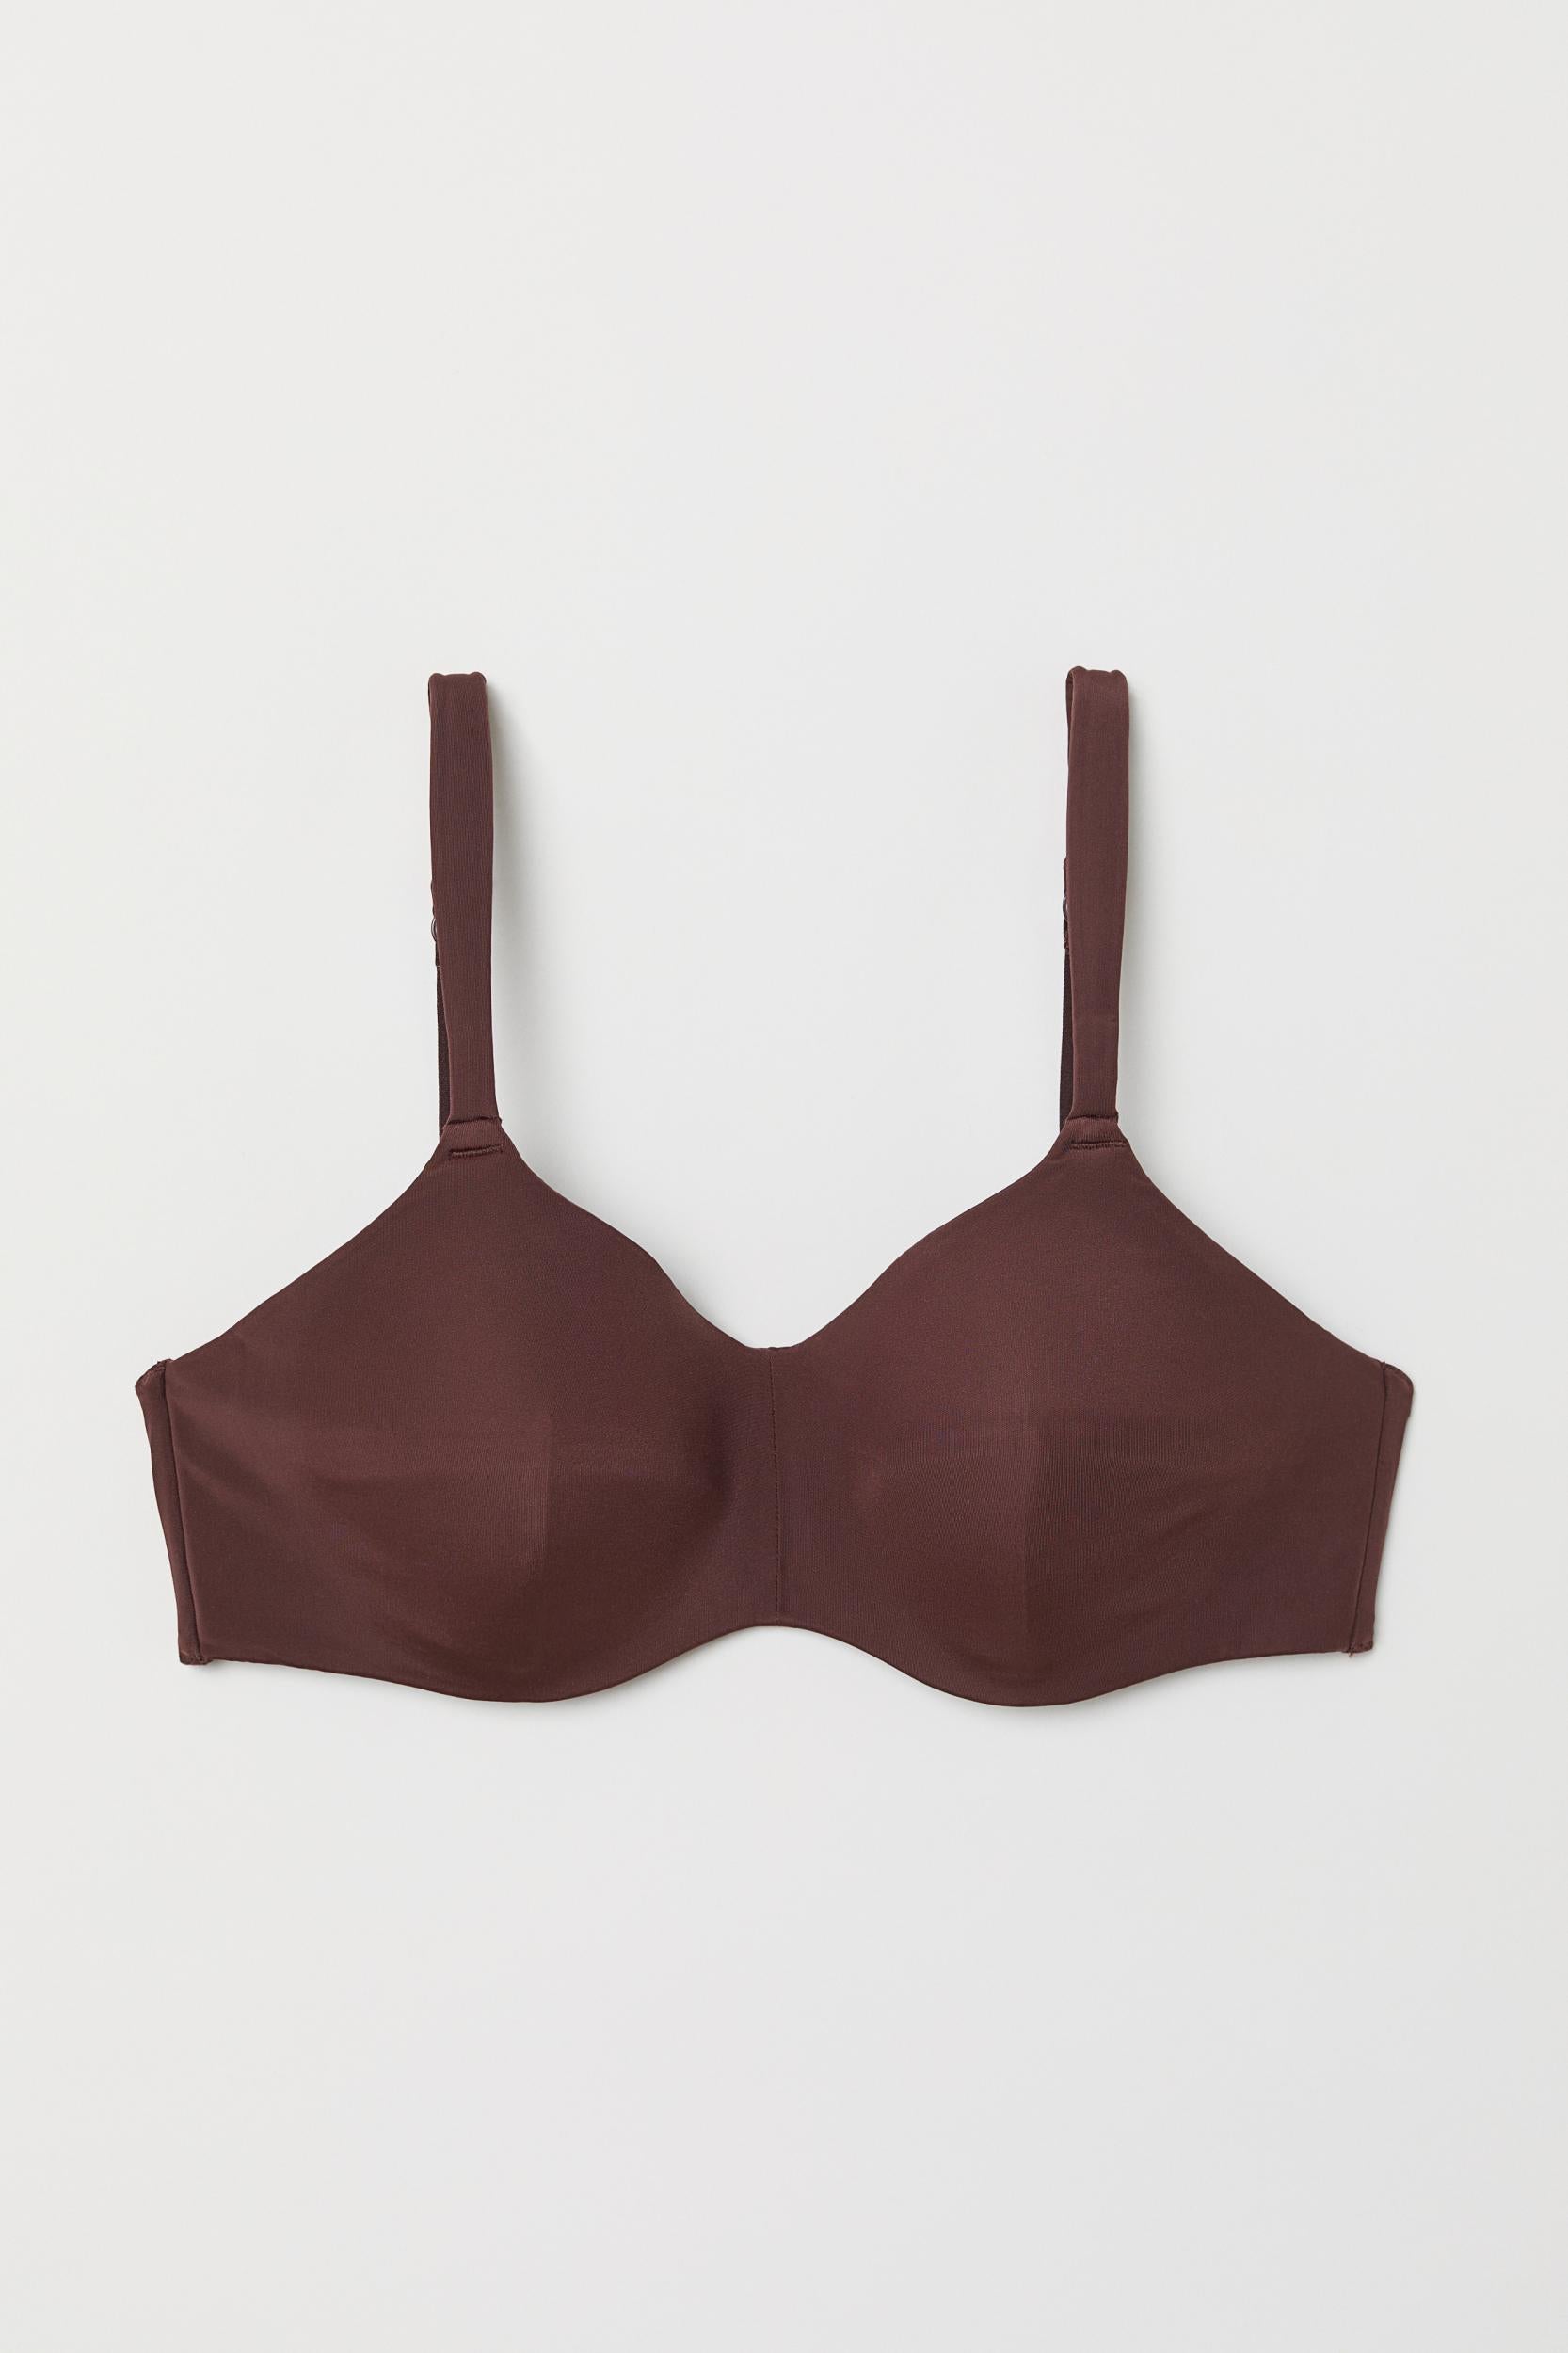 H&M launches bra collection designed for breast cancer survivors, The  Independent